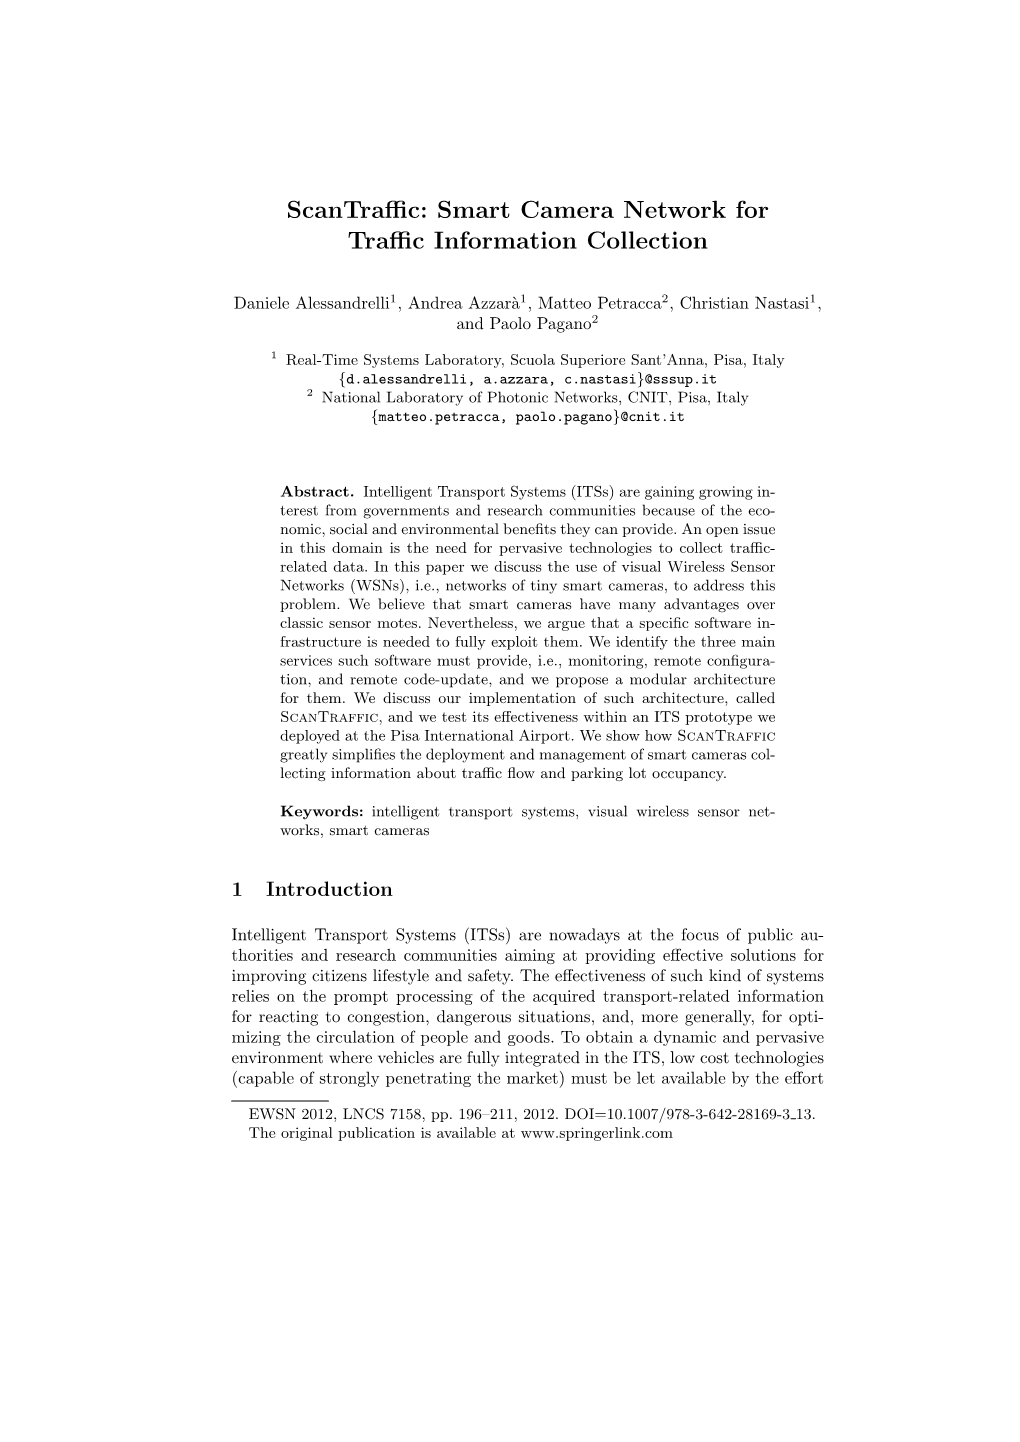 Scantraffic: Smart Camera Network for Traffic Information Collection